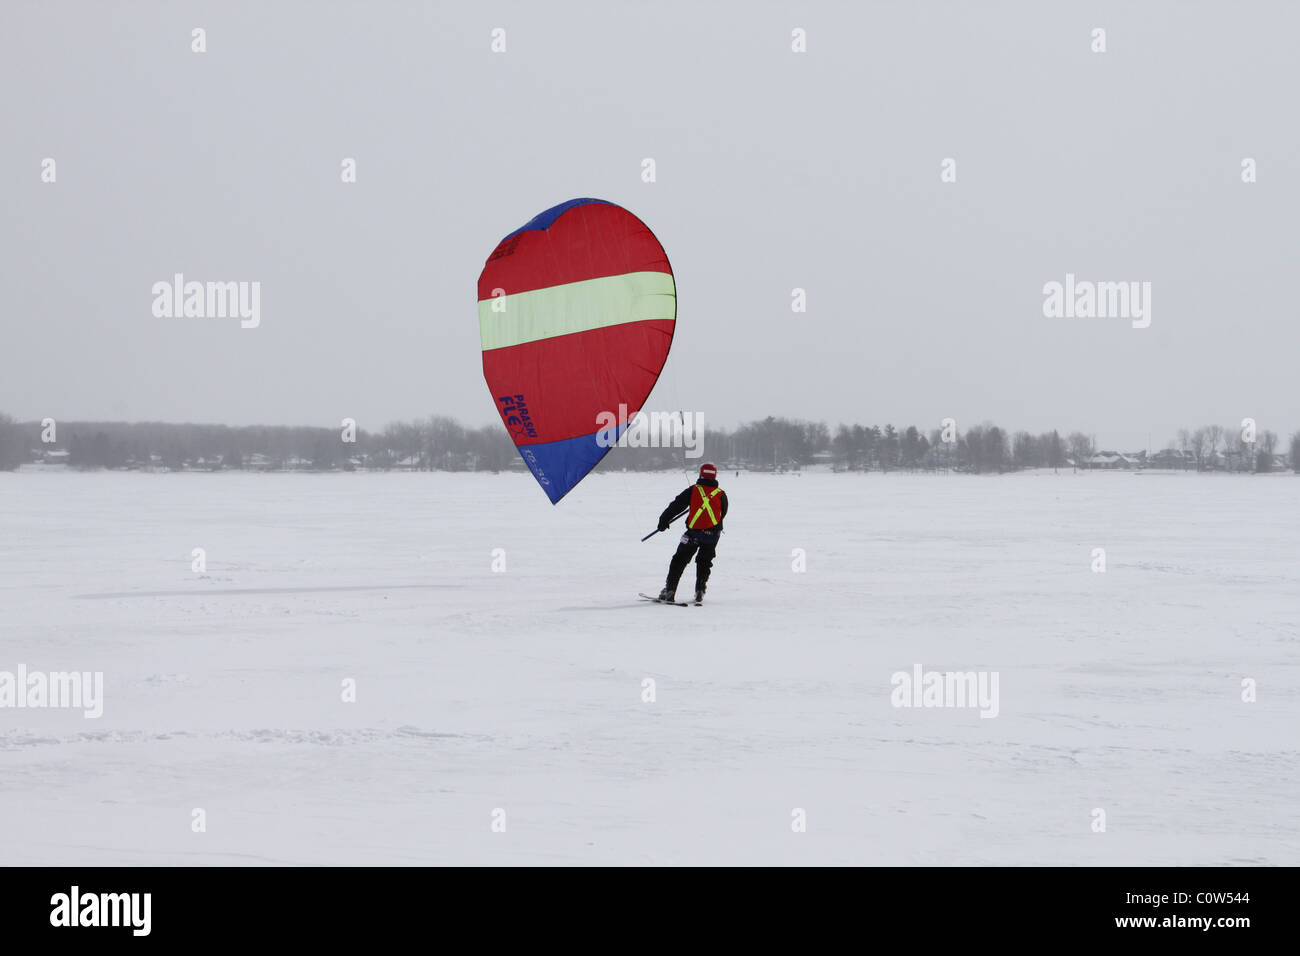 One man skiing on ice with red kite Stock Photo